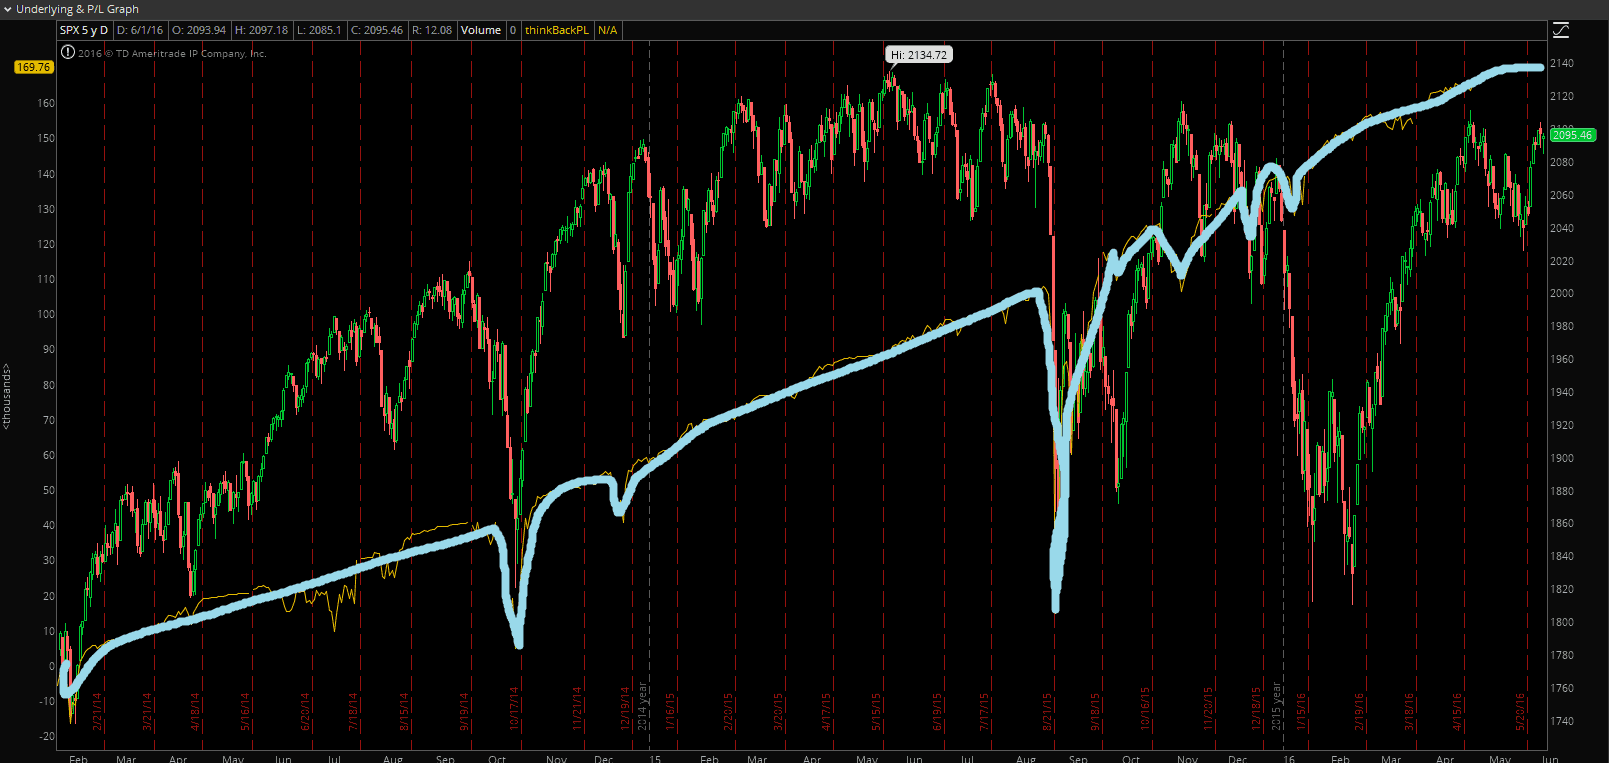 SPX_strangles_sell_backtest with enlarged equity curve